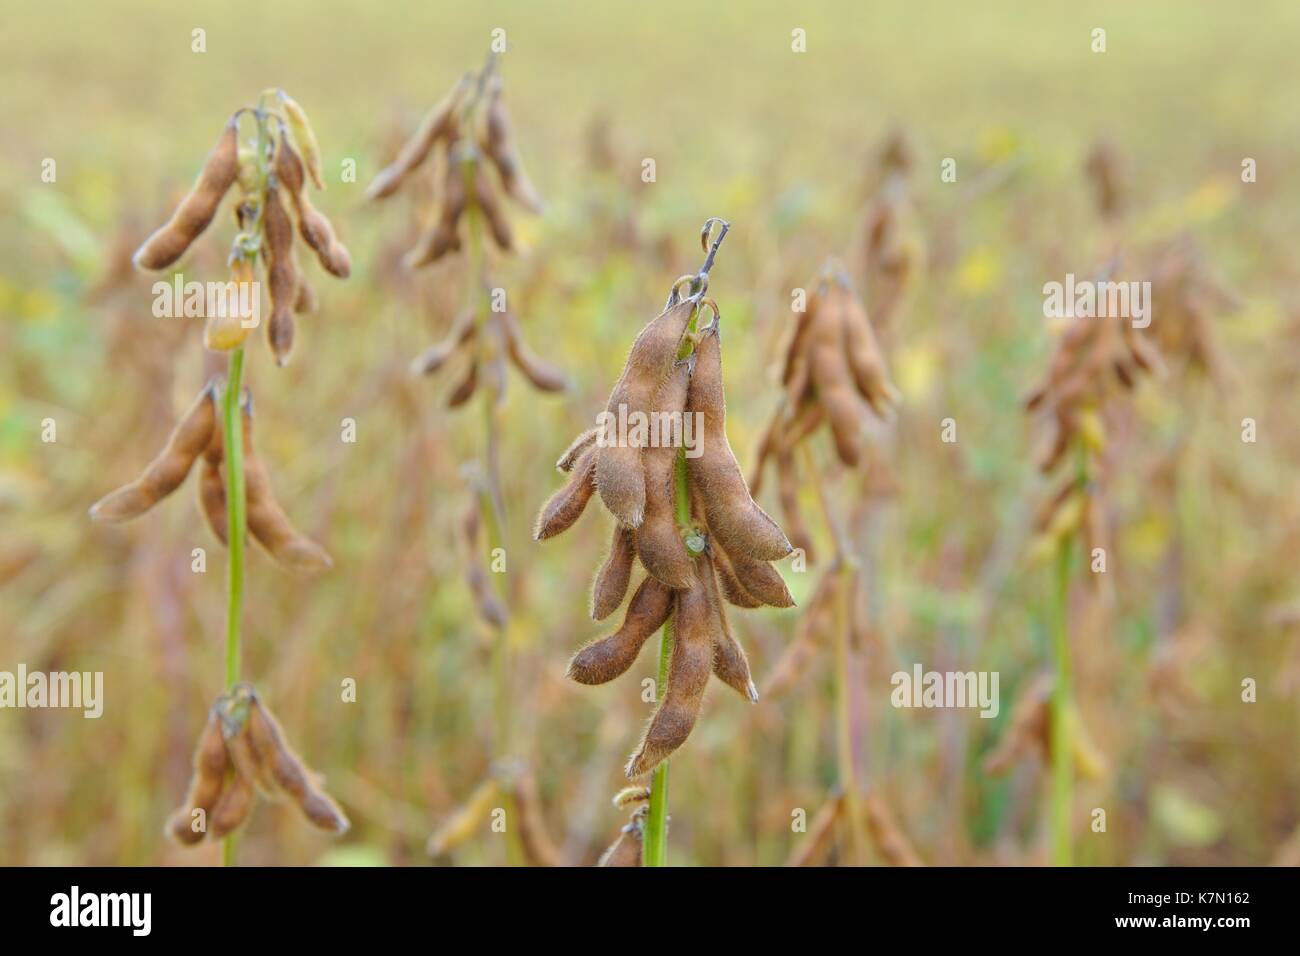 Cultivation of Soya bean, Soya bean plants (Glycine max) with ripe pods, Baden-Württemberg, Germany Stock Photo